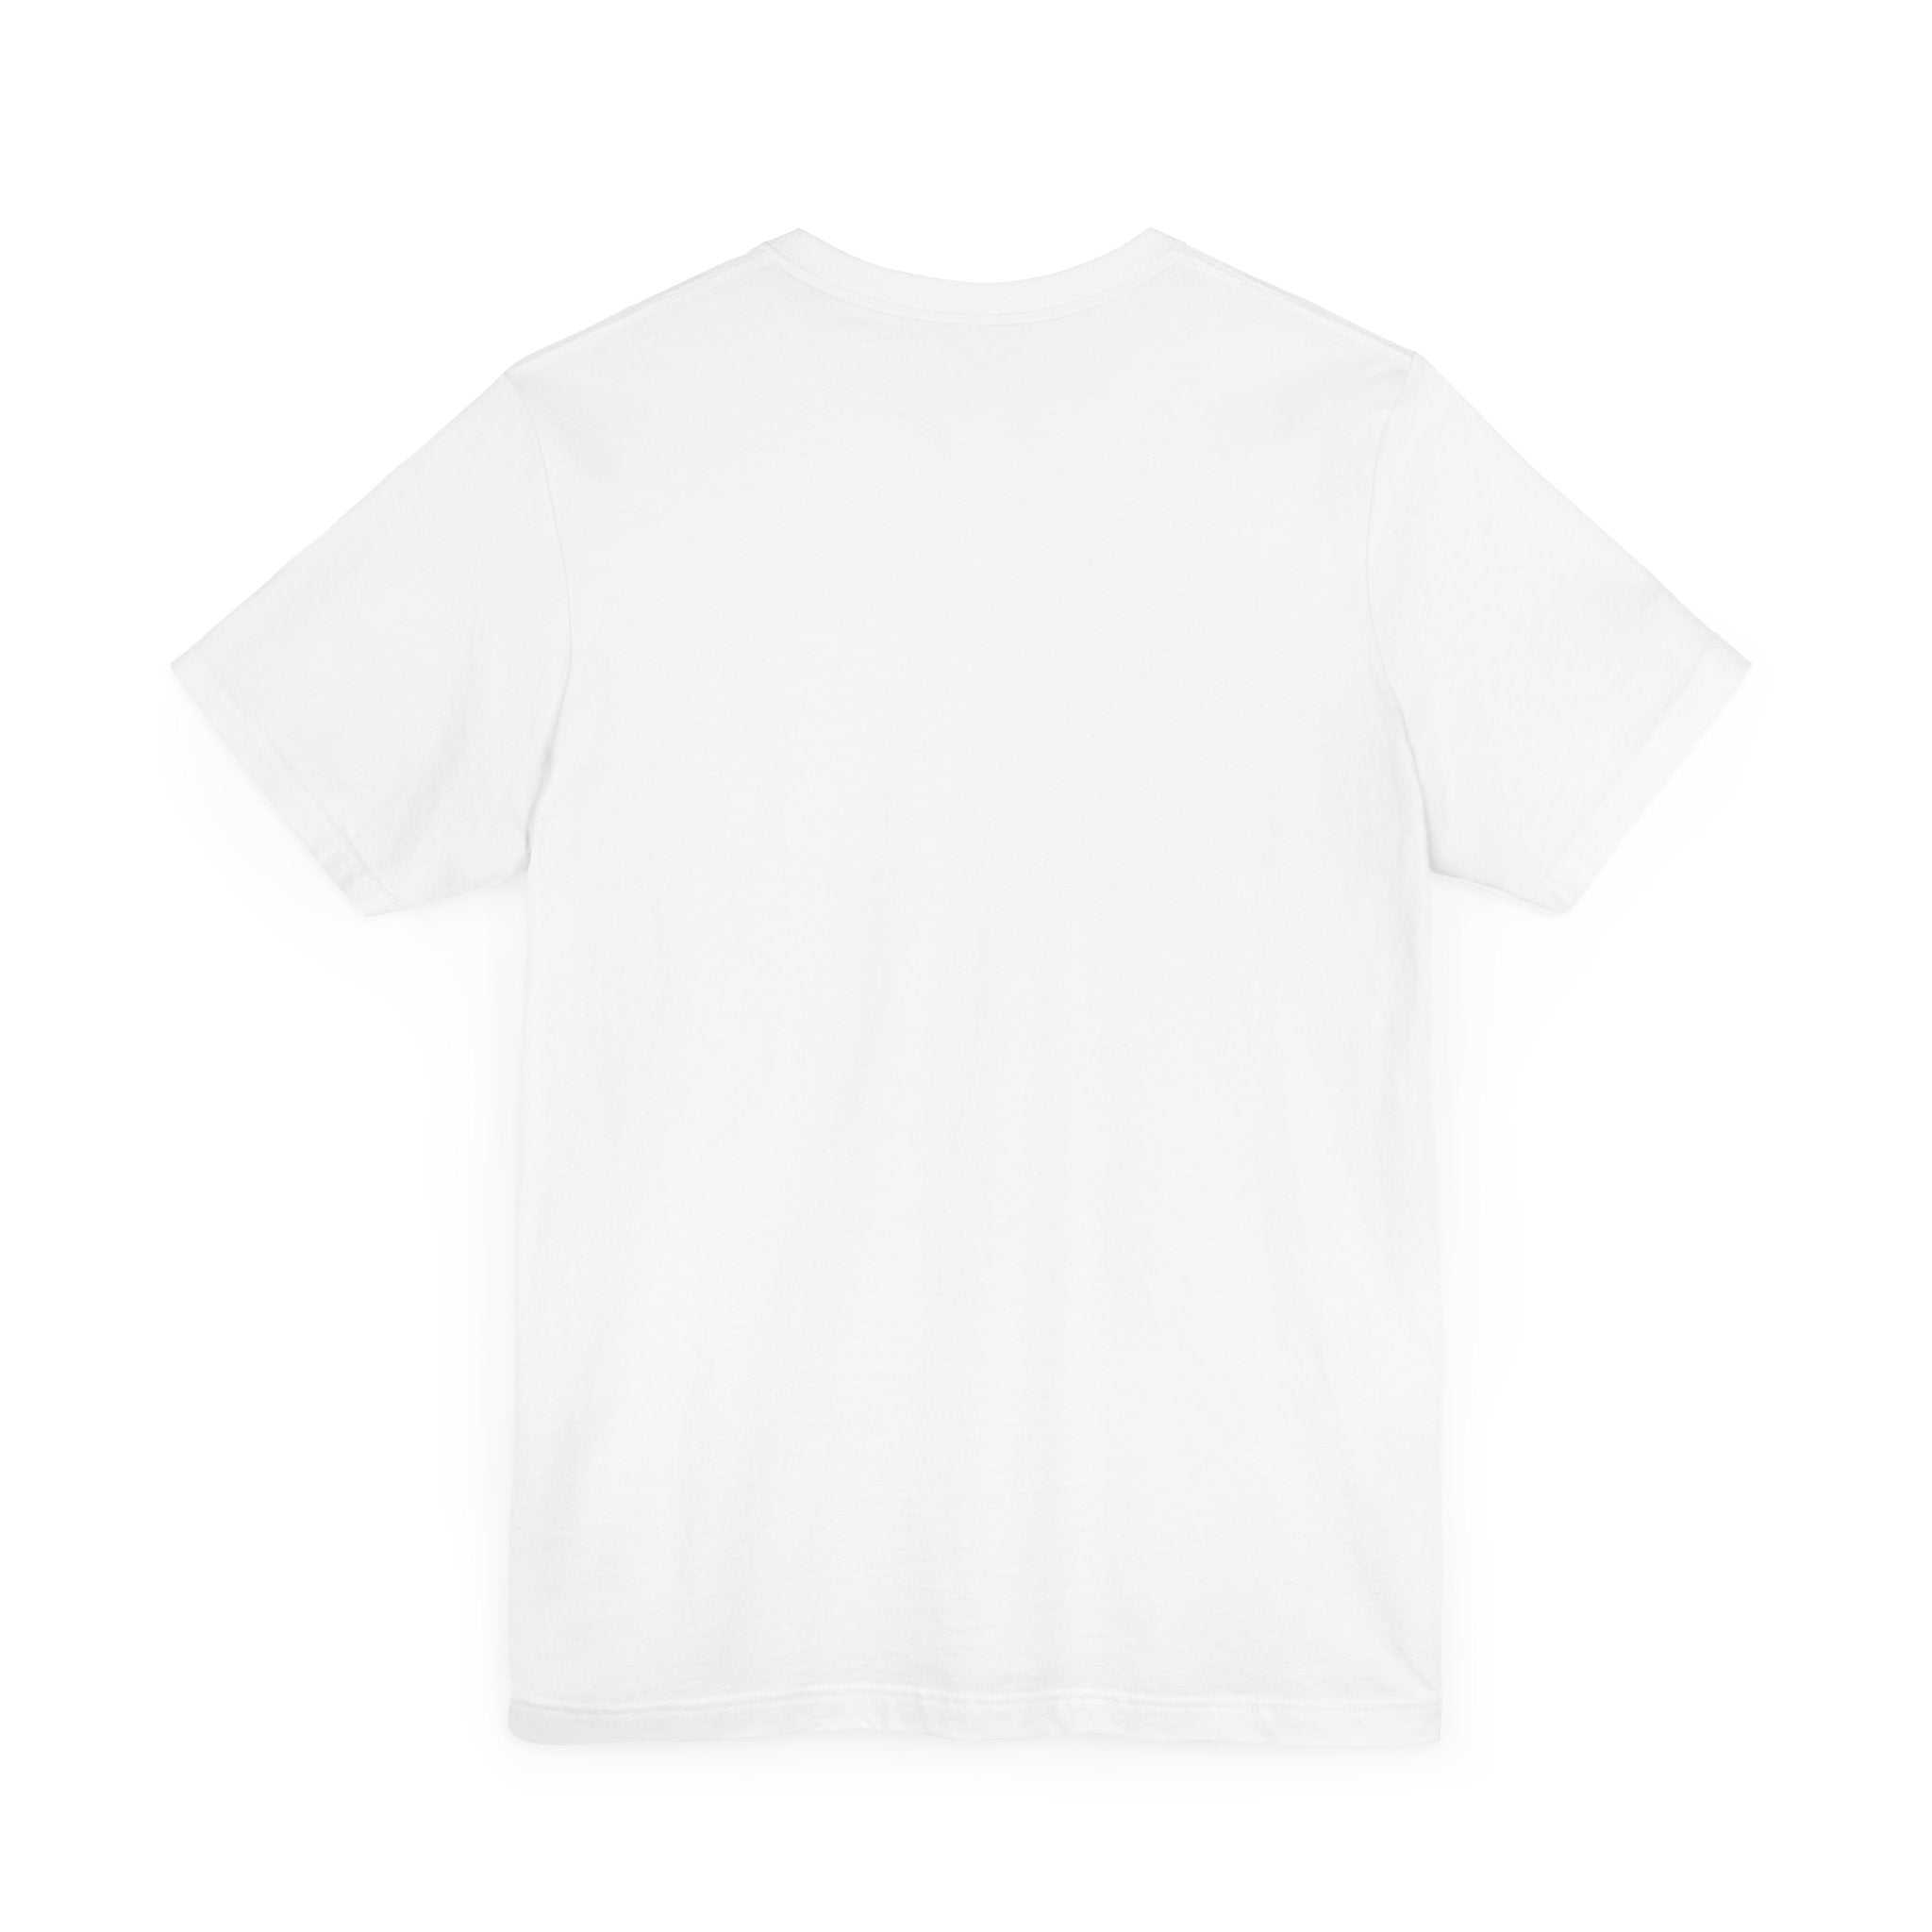 A stylish, C-Ho-Co-La-Te - T-Shirt crafted from 100% cotton is shown from the back, laid flat on a white background.